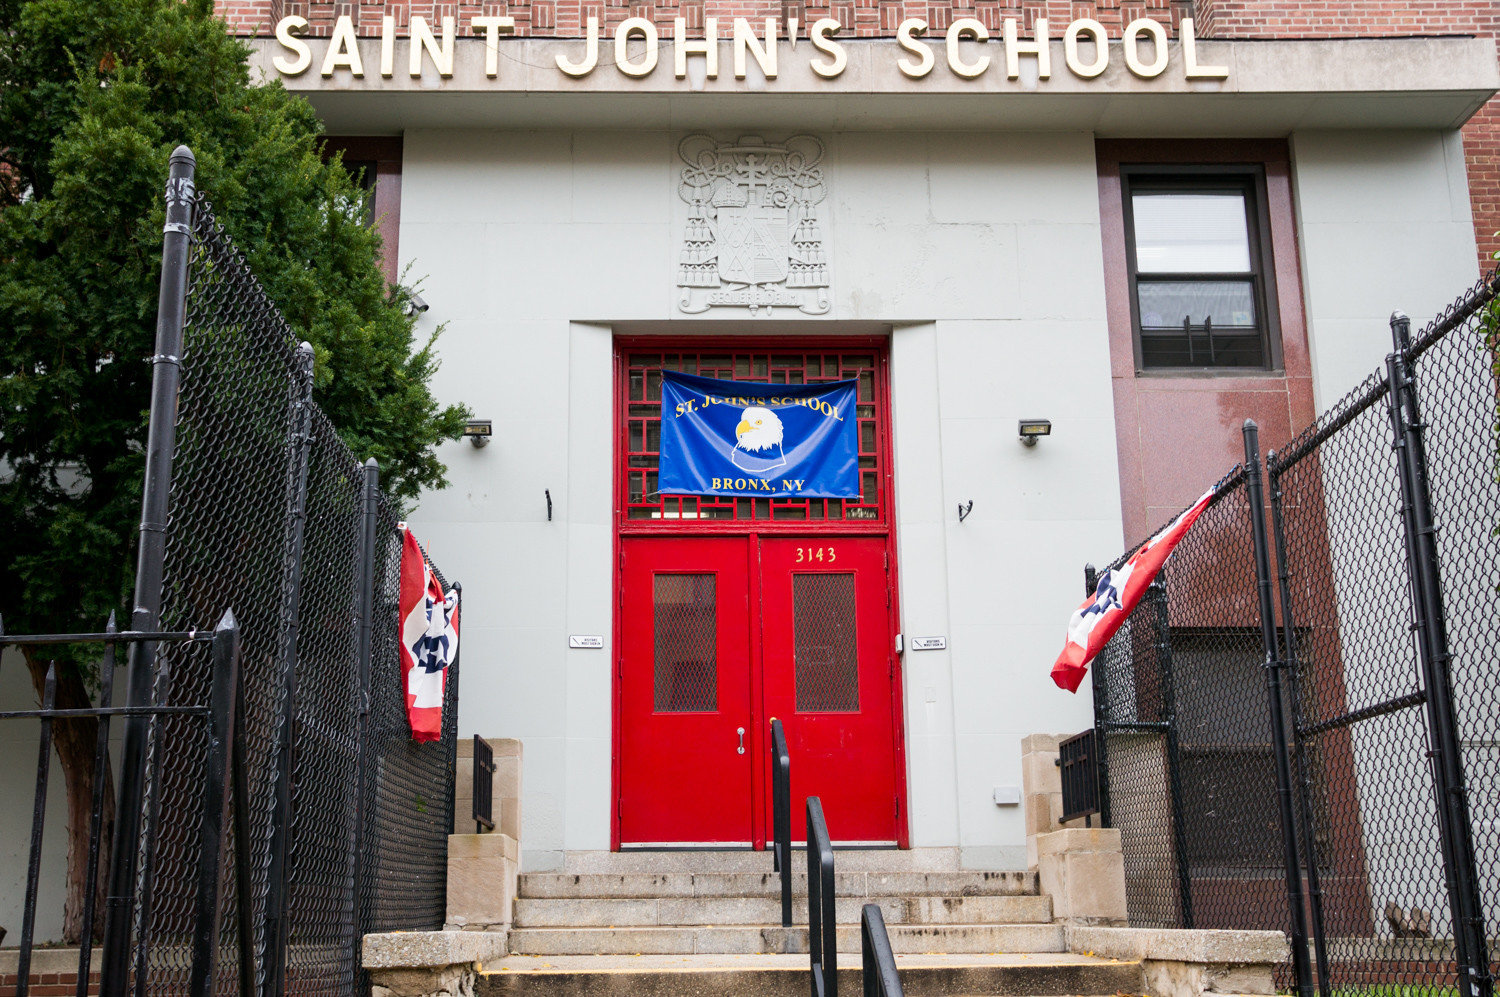 St. John's School is one of 20 being closed permanently by the Archdiocese of New York after dwindling attendance, exacerbated by the coronavirus pandemic.